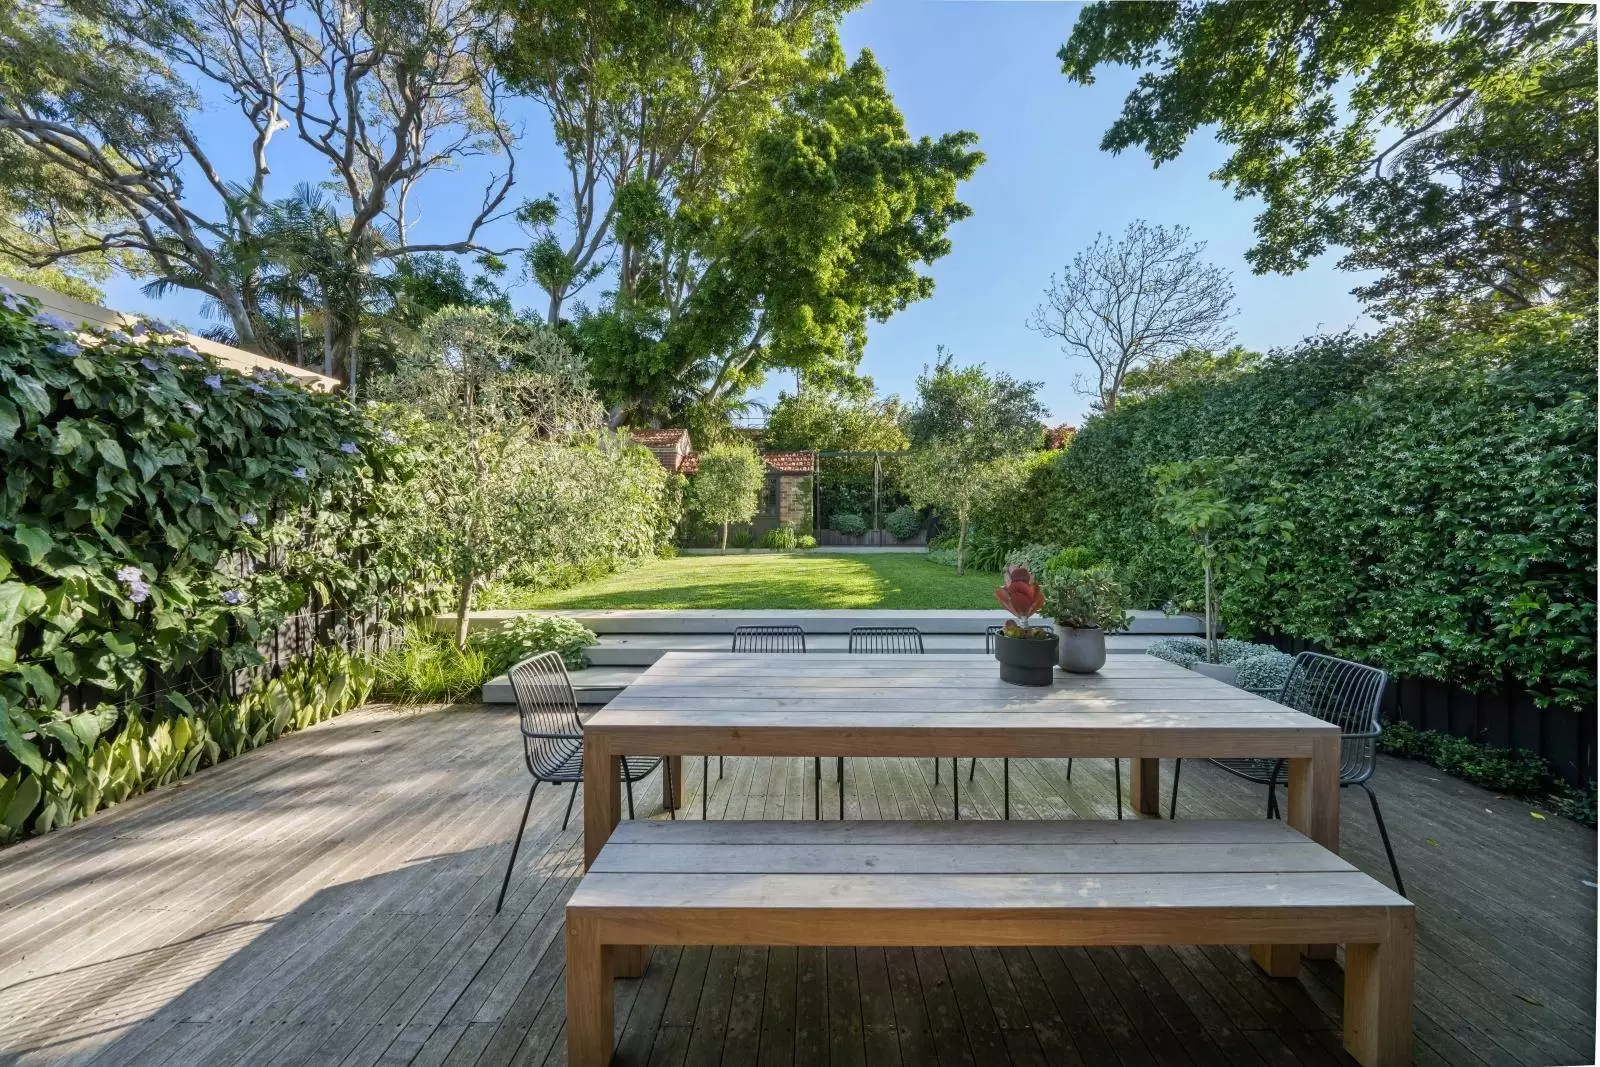 Photo #8: 13 Russell Street, Vaucluse - Leased by Sydney Sotheby's International Realty